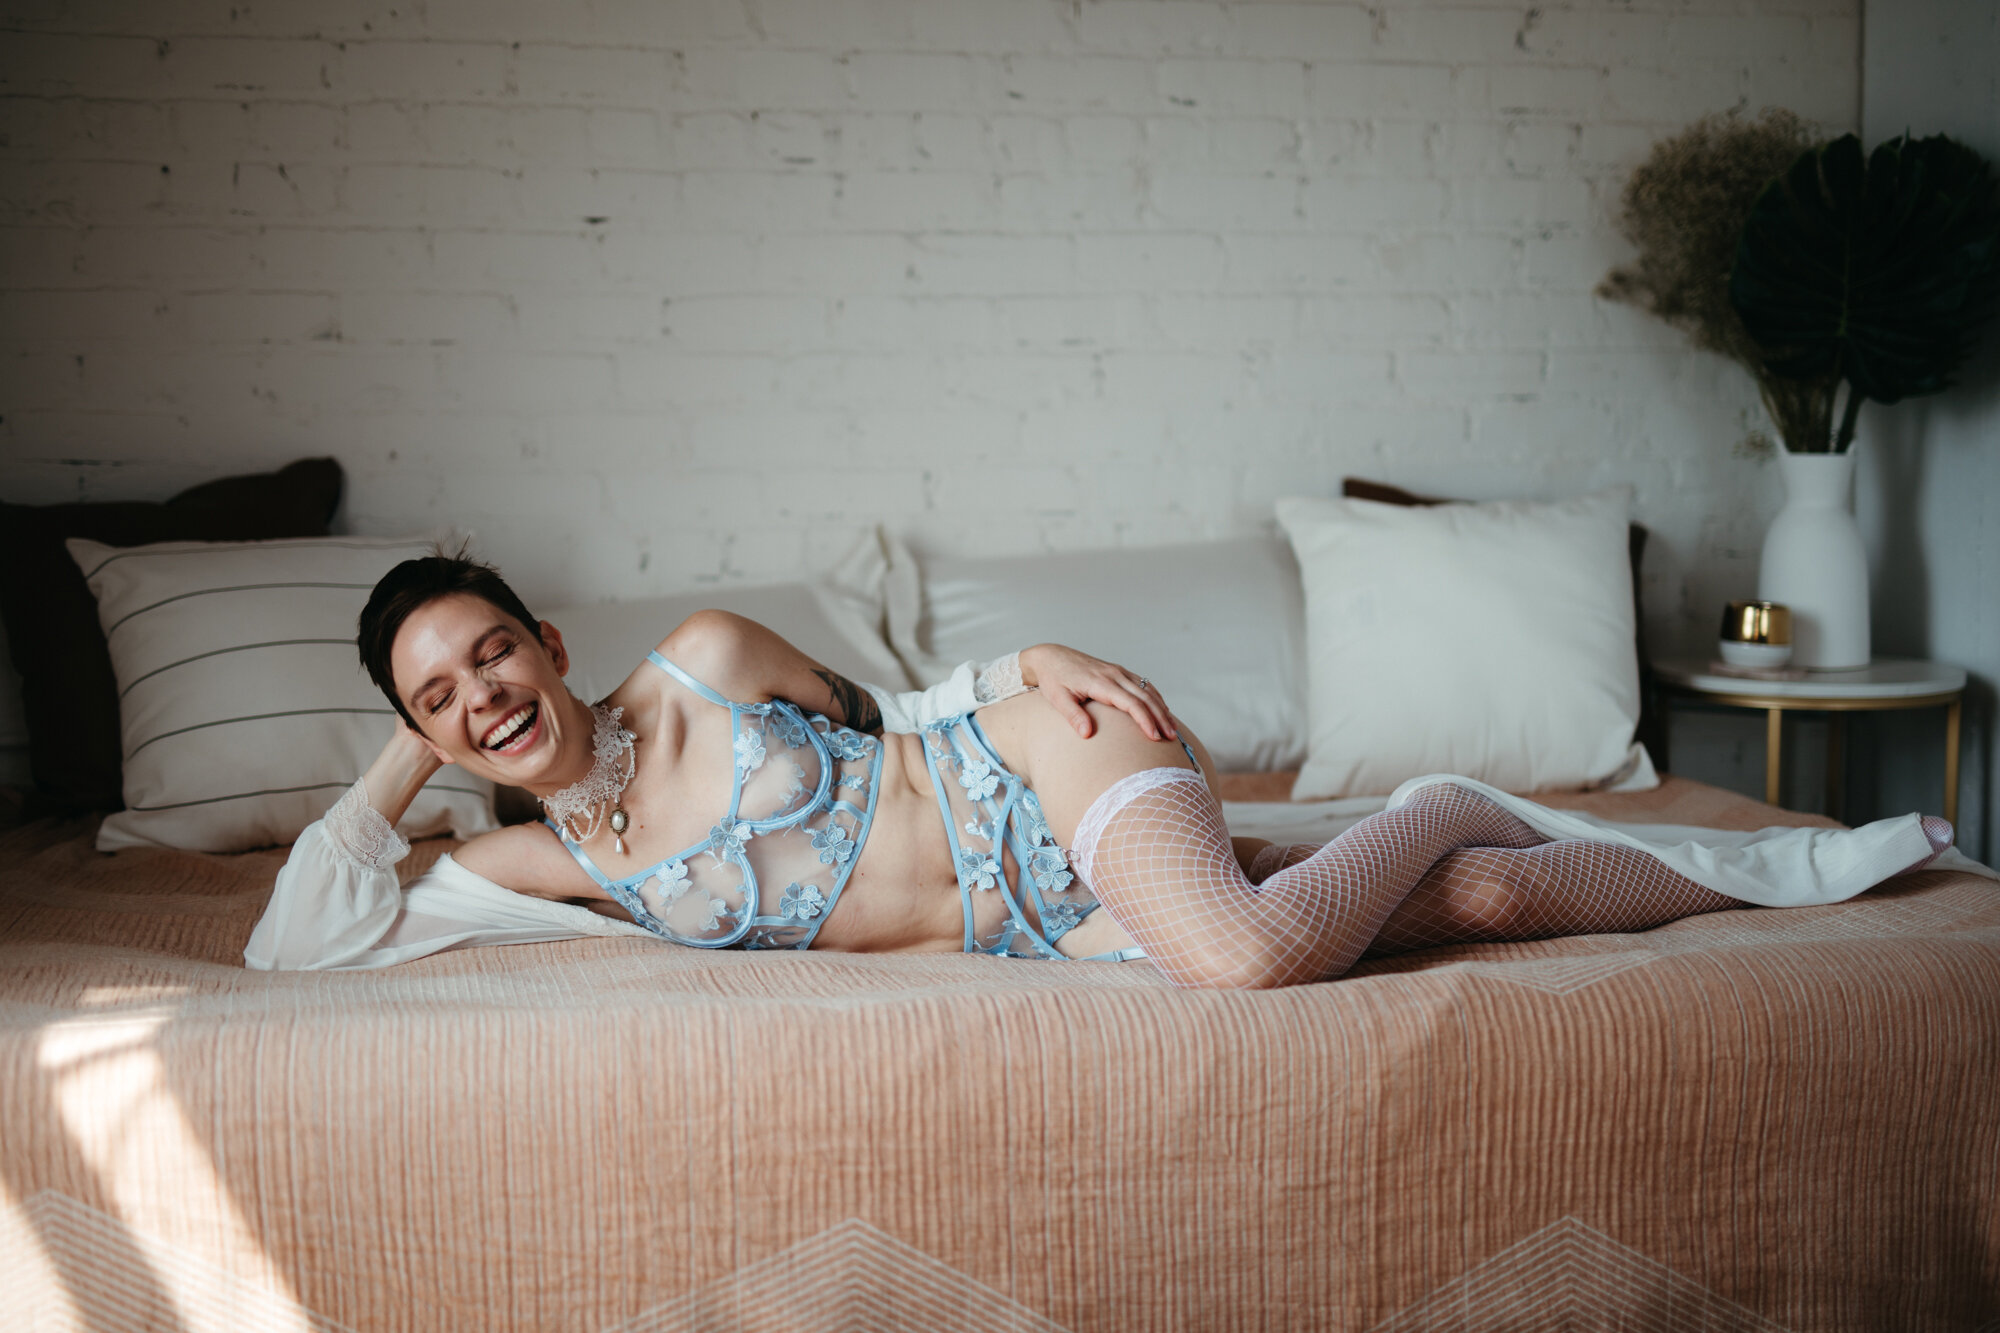 Genderqueer person wearing victorian style blue lingerie laying on a bed and laughing